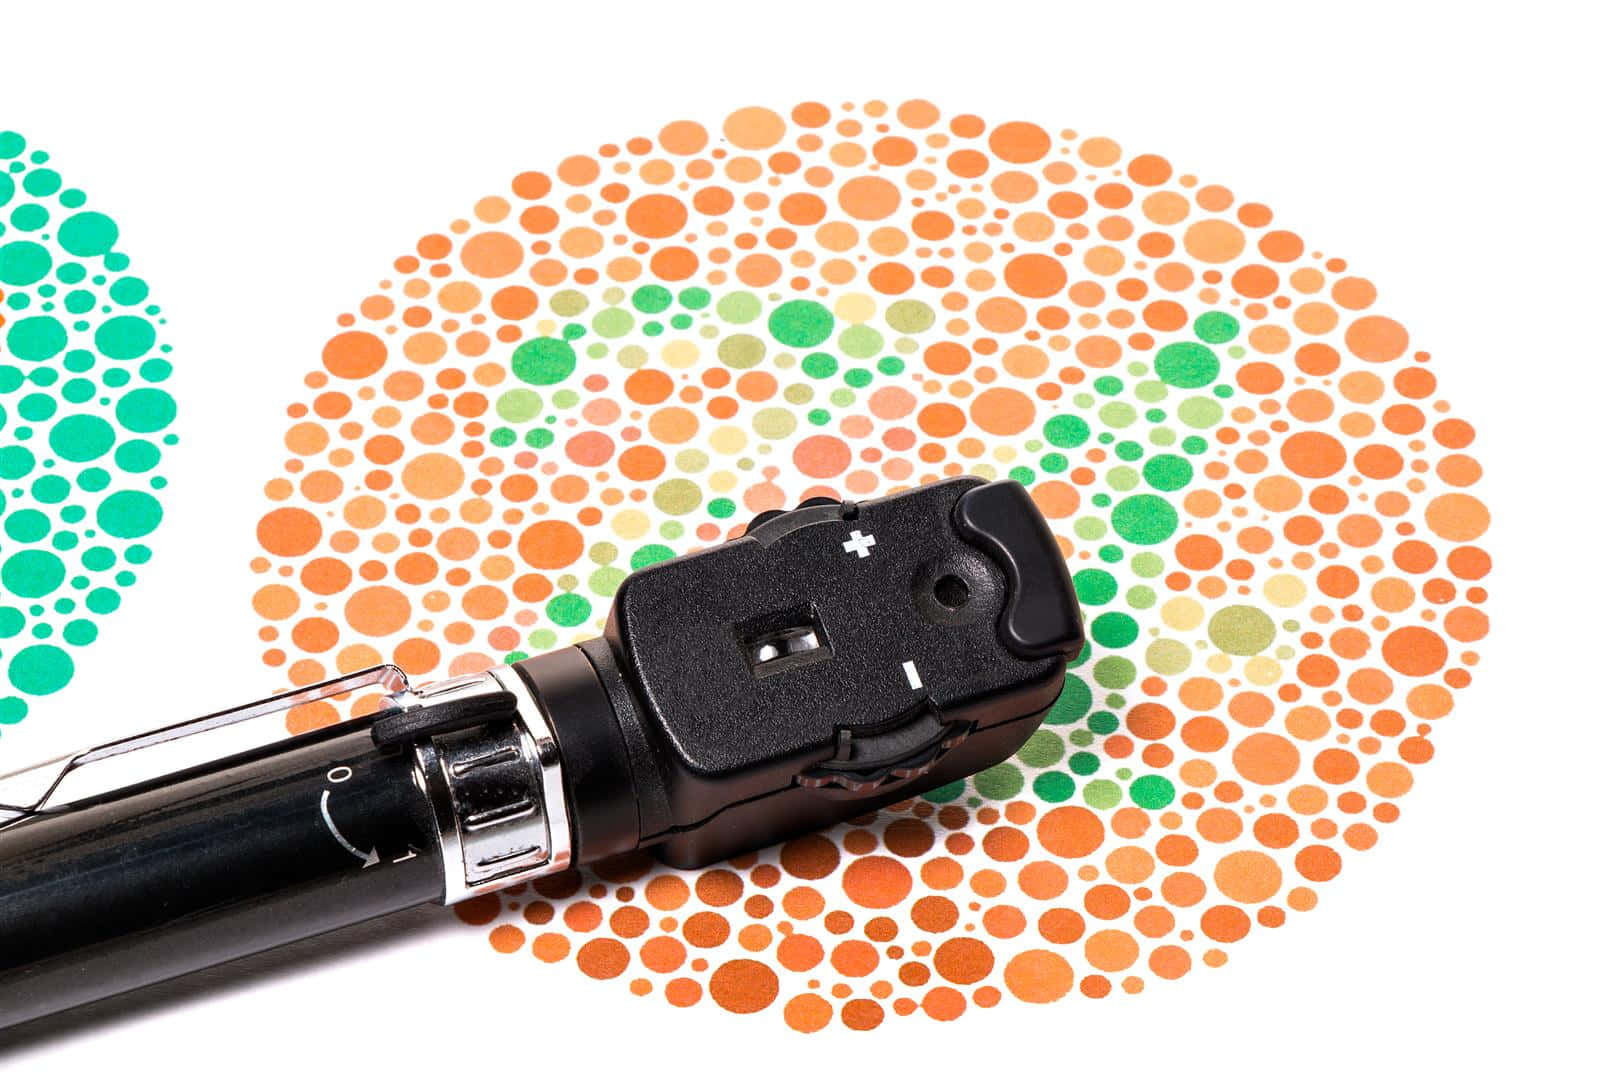 A Camera Is Placed On Top Of A Circle Of Dots